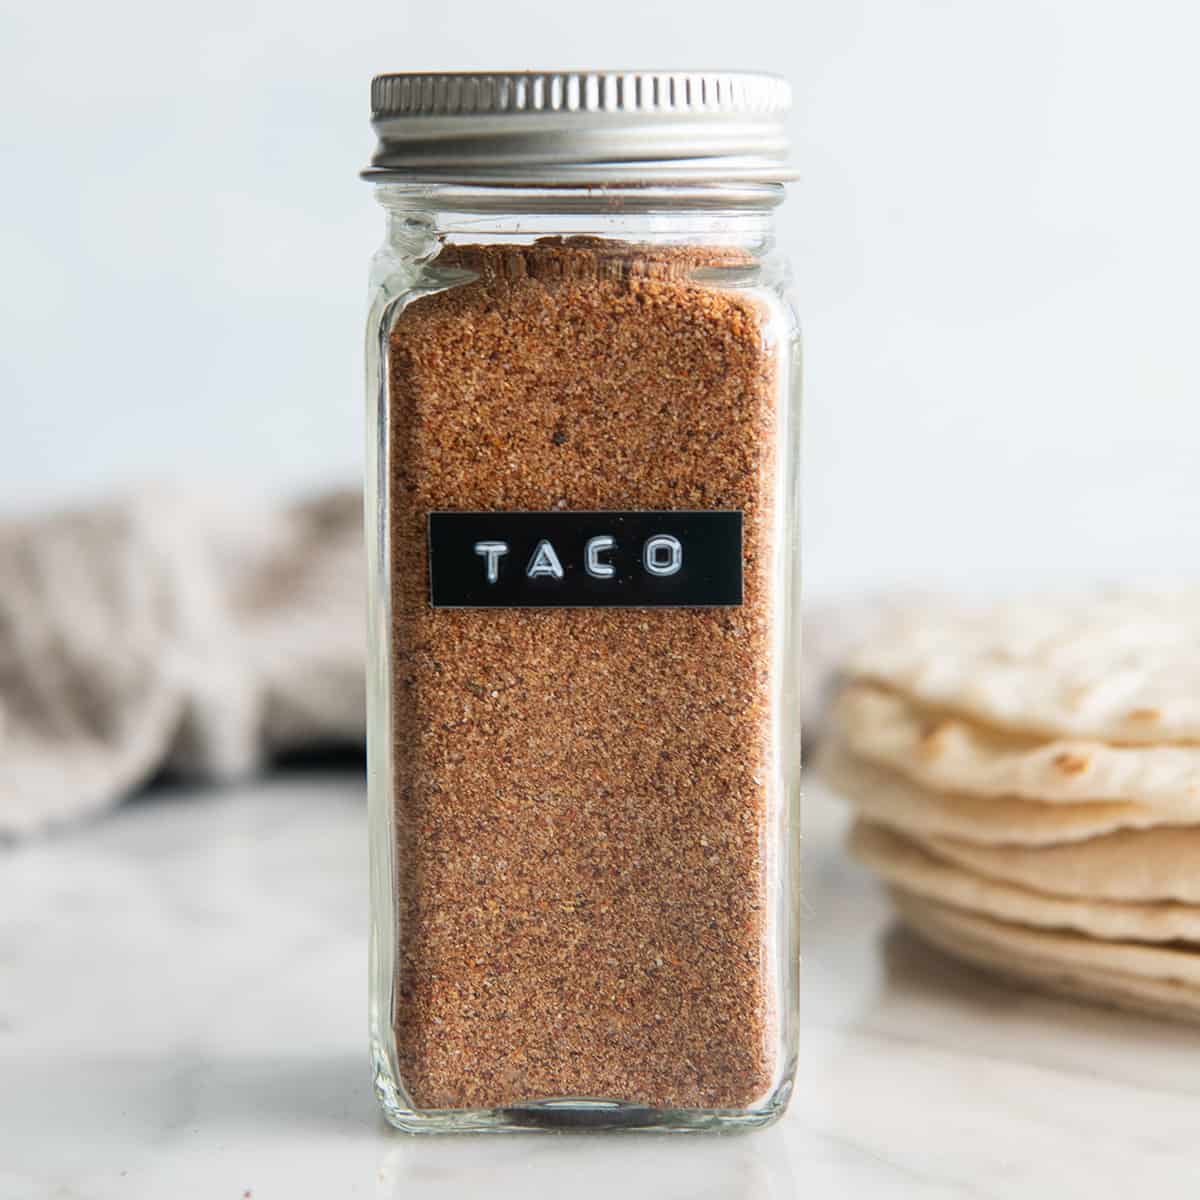 a glass spice jar of Homemade Taco Seasoning with a label "taco"